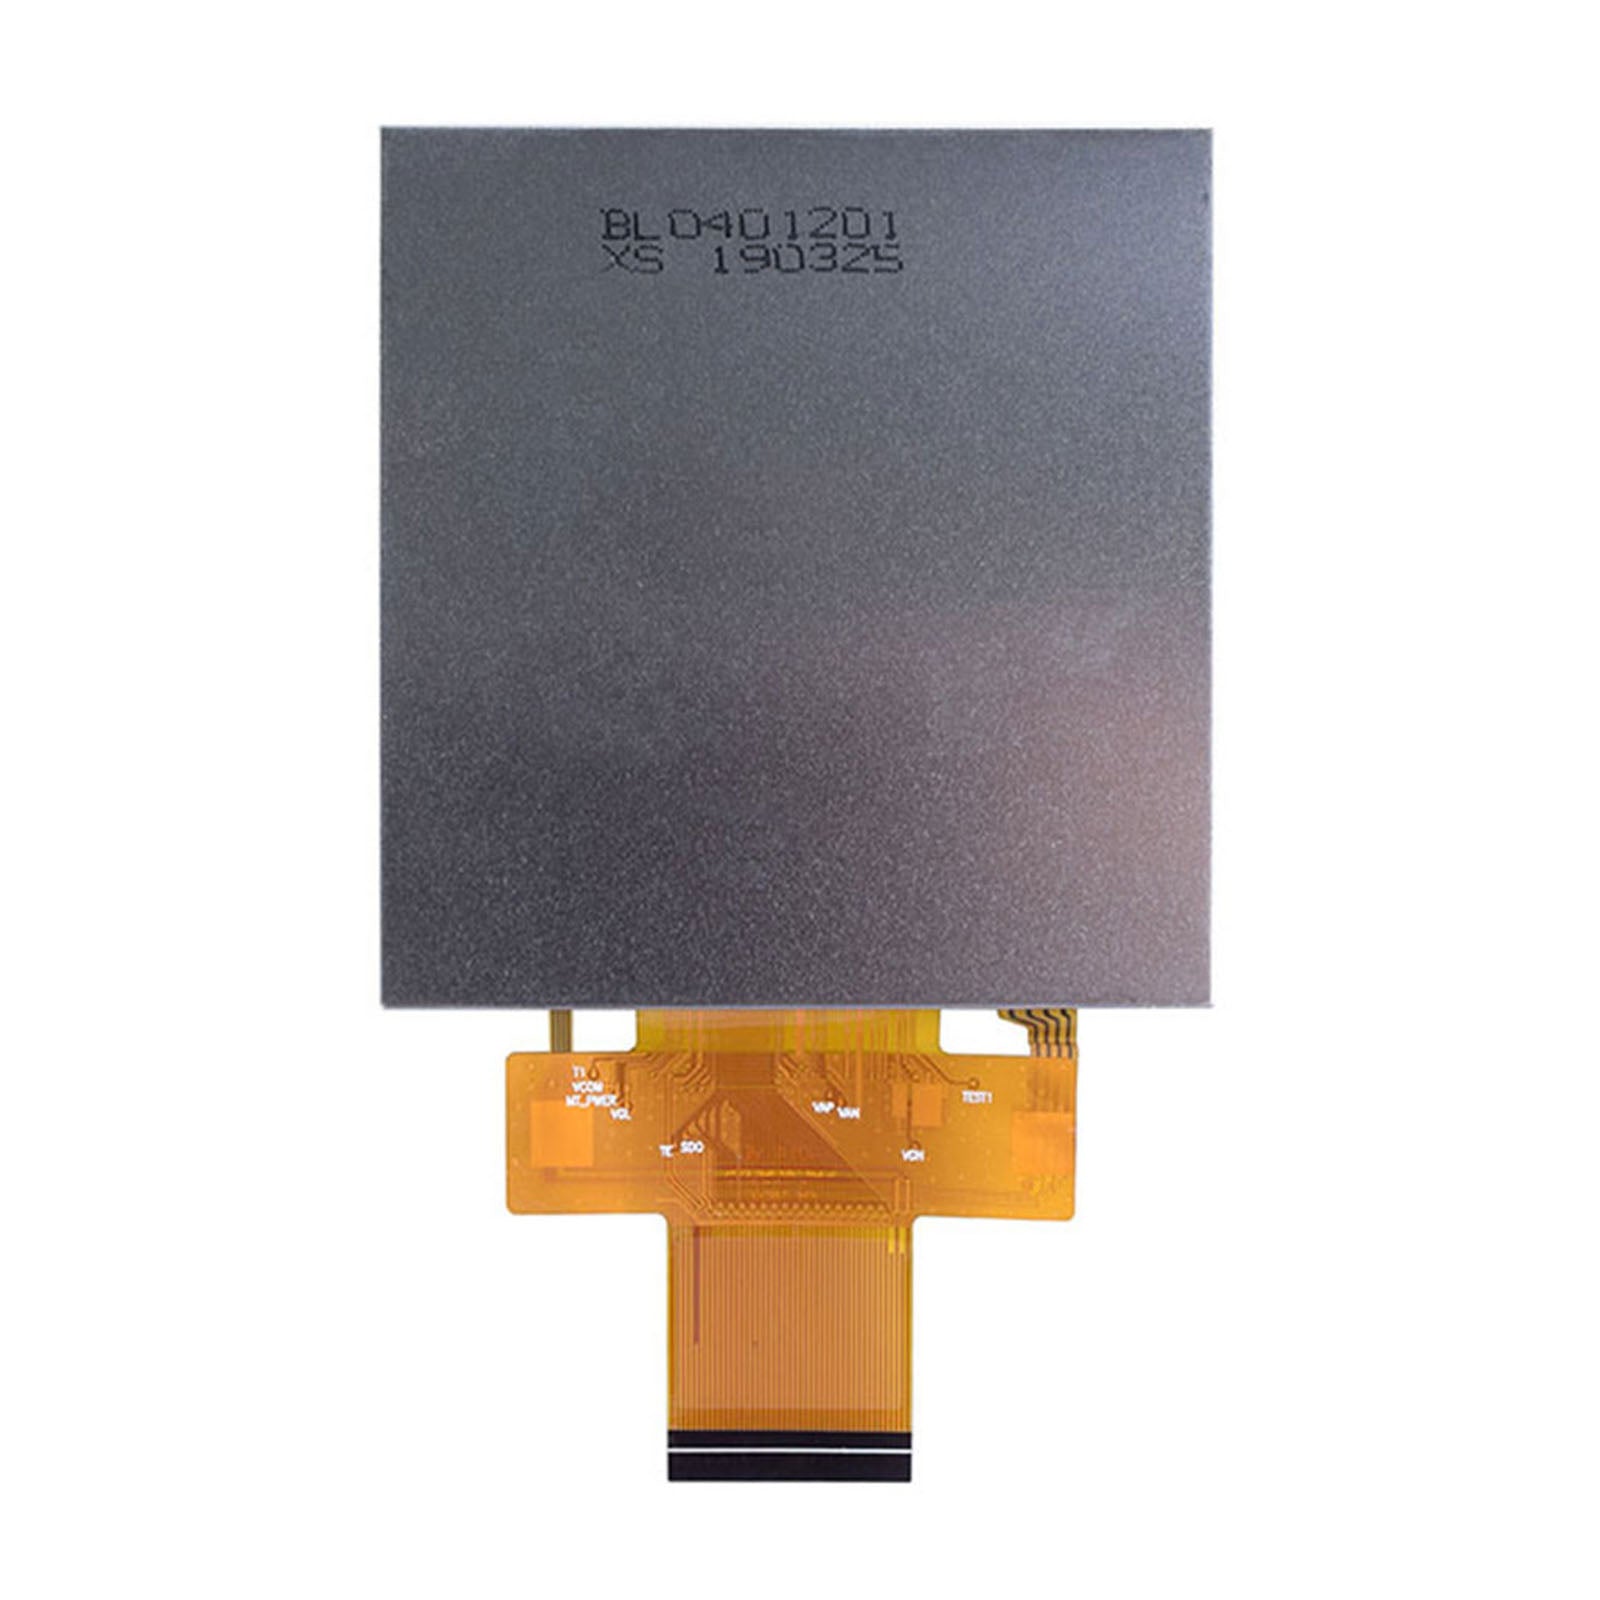 isplayModule 4.0" IPS 480X480 High Brightness TFT Display Panel With Resistive Touch –RGB